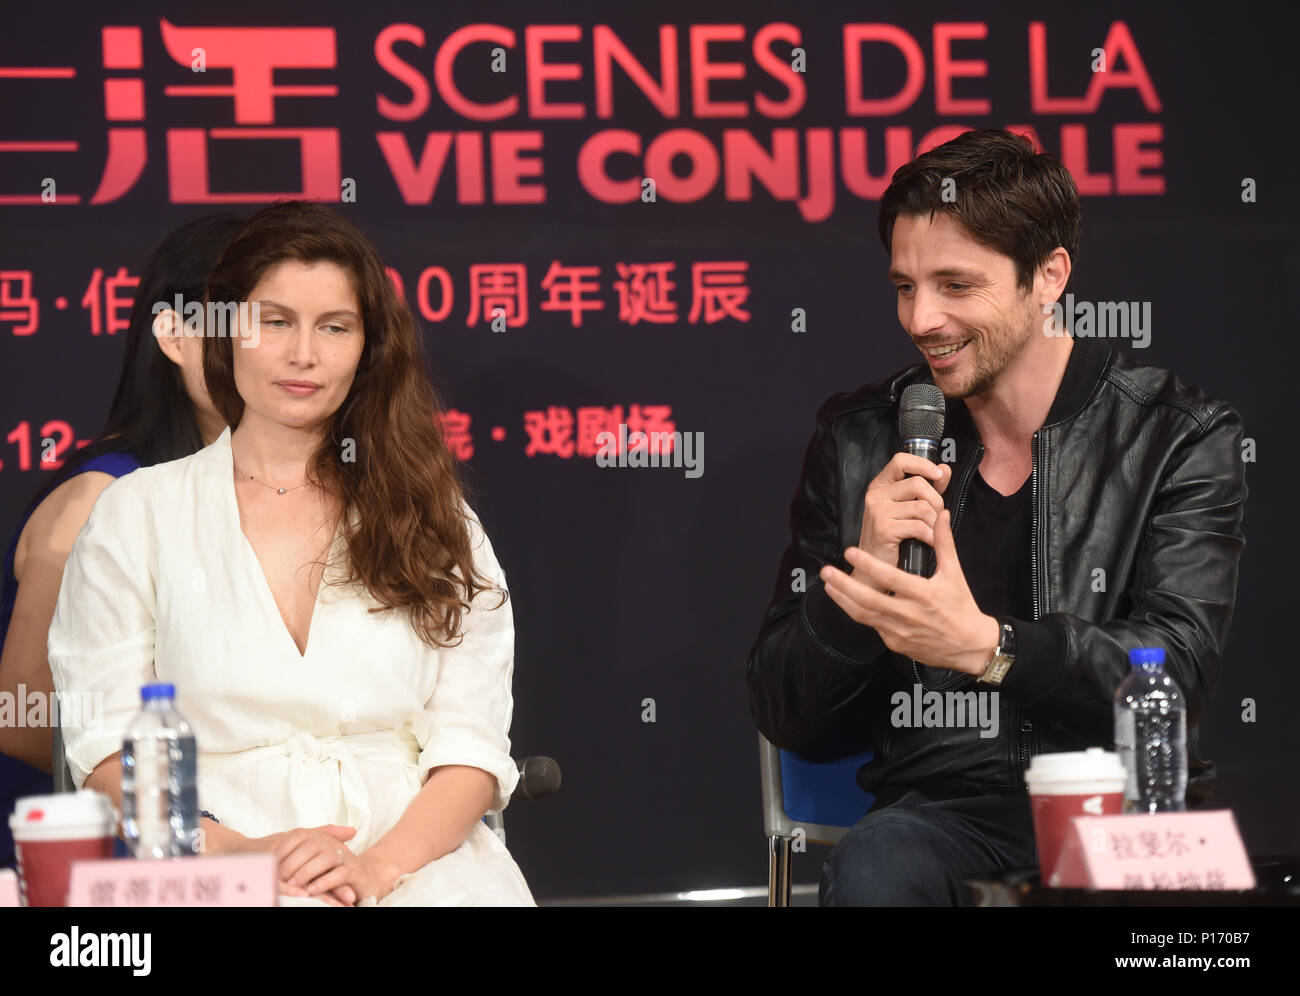 (180611) -- BEIJING, June 11, 2018 (Xinhua) -- Actress Laetitia Casta (L) and actor Raphael Personnaz attend a salon of the drama 'Scenes De La Vie Conjugale' at the National Center for the Performing Arts in Beijing, capital of China, June 11, 2018. The drama is adapted from Ingmar Bergman's film with the same title. It will be staged on June 12 and 13 in Beijing. (Xinhua/Luo Xiaoguang)(mcg) Stock Photo